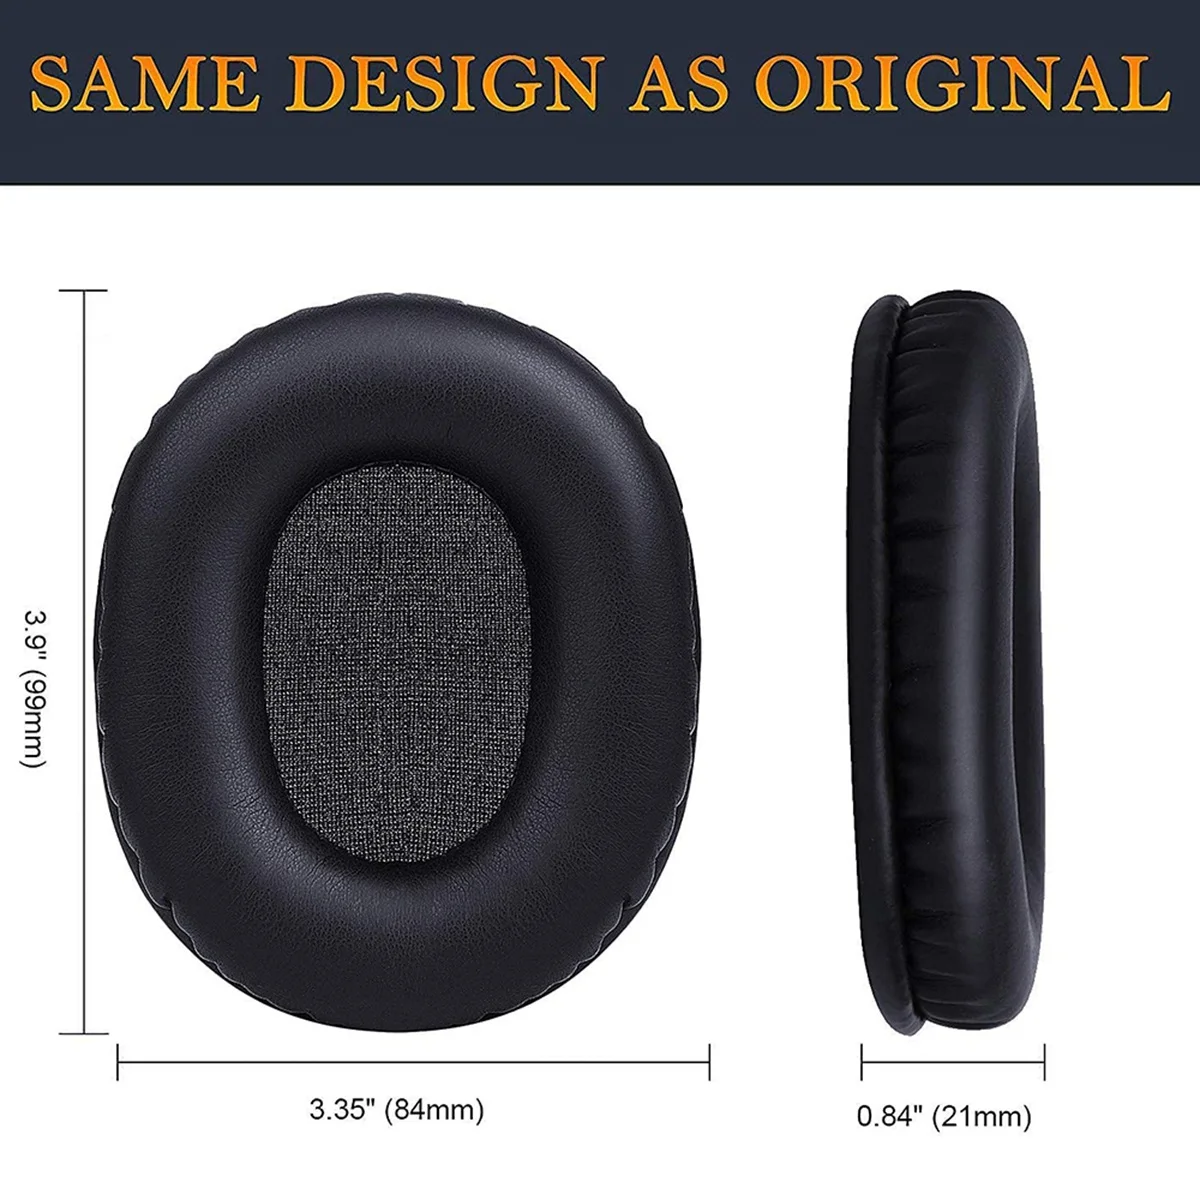 M50X Replacement Earpads Compatible with Audio Technica ATH M50 M50X M50XBT M50RD M40X M30X M20X MSR7 SX1 Headphones